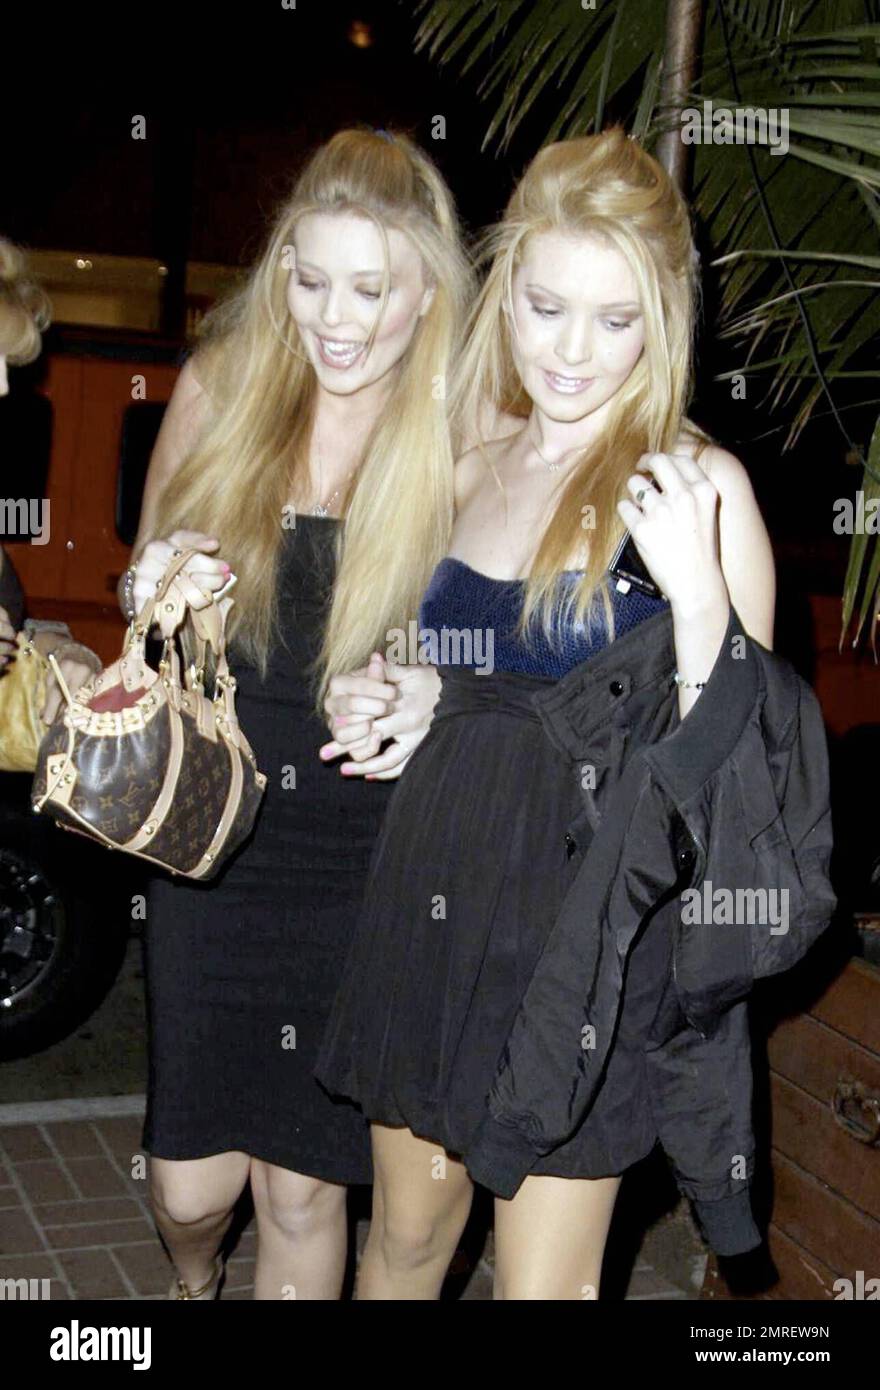 Judy Landers and daughters Kristy and Lindsey arrive at the restaurant Madeos in a big red Hummer. Judy's sister Audrey was also at Madeos for the evening with her son Daniel. Los Angeles, CA. 11/19/08. Stock Photo